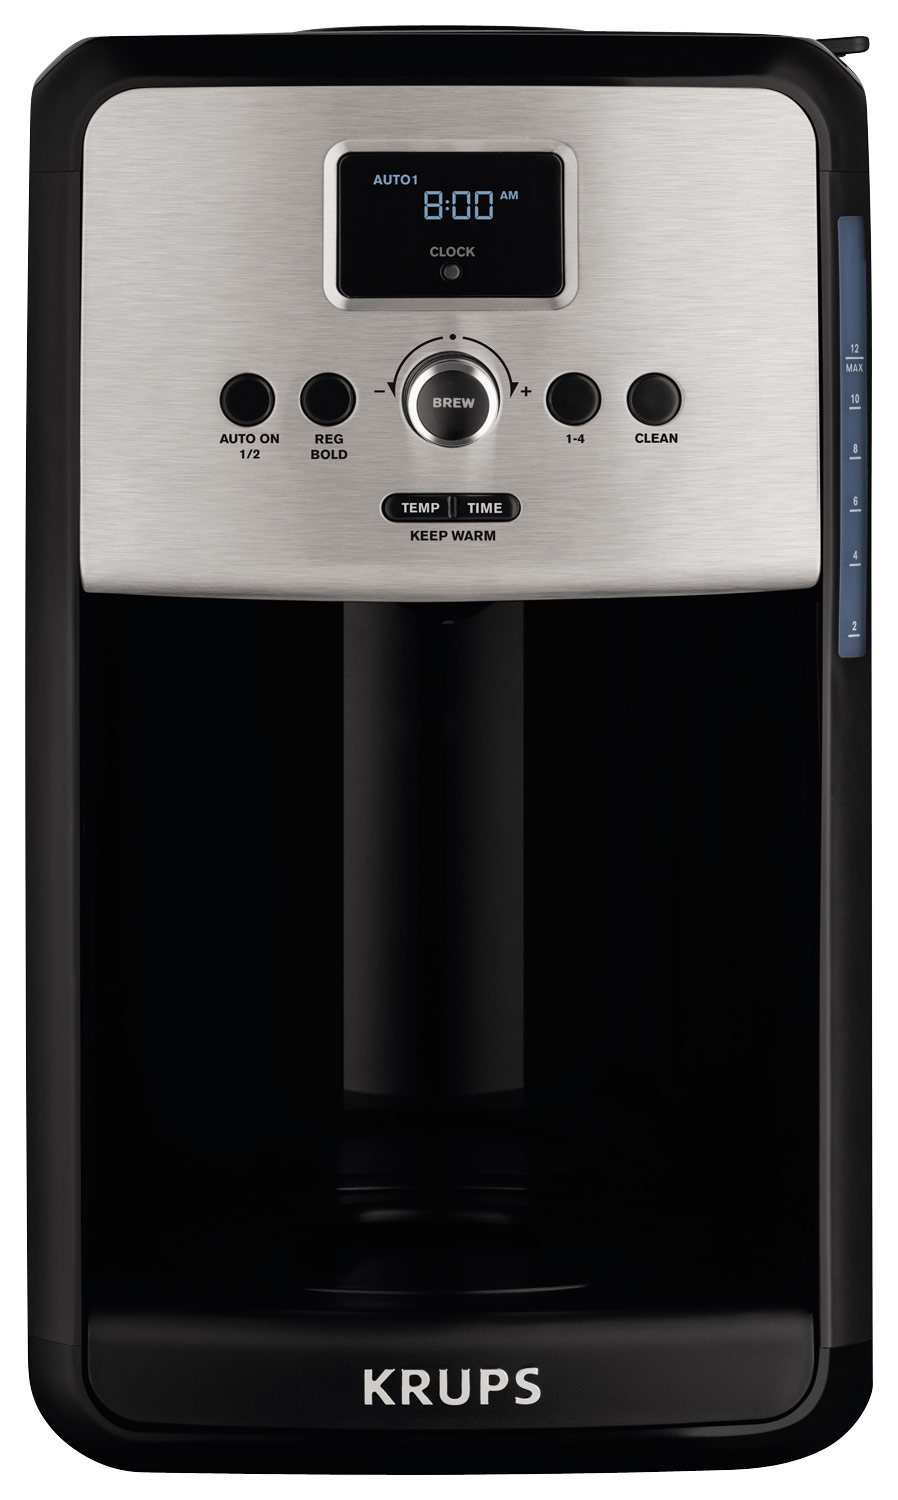 Krups Savoy 12 Cup Coffee Maker - Shop Coffee Makers at H-E-B